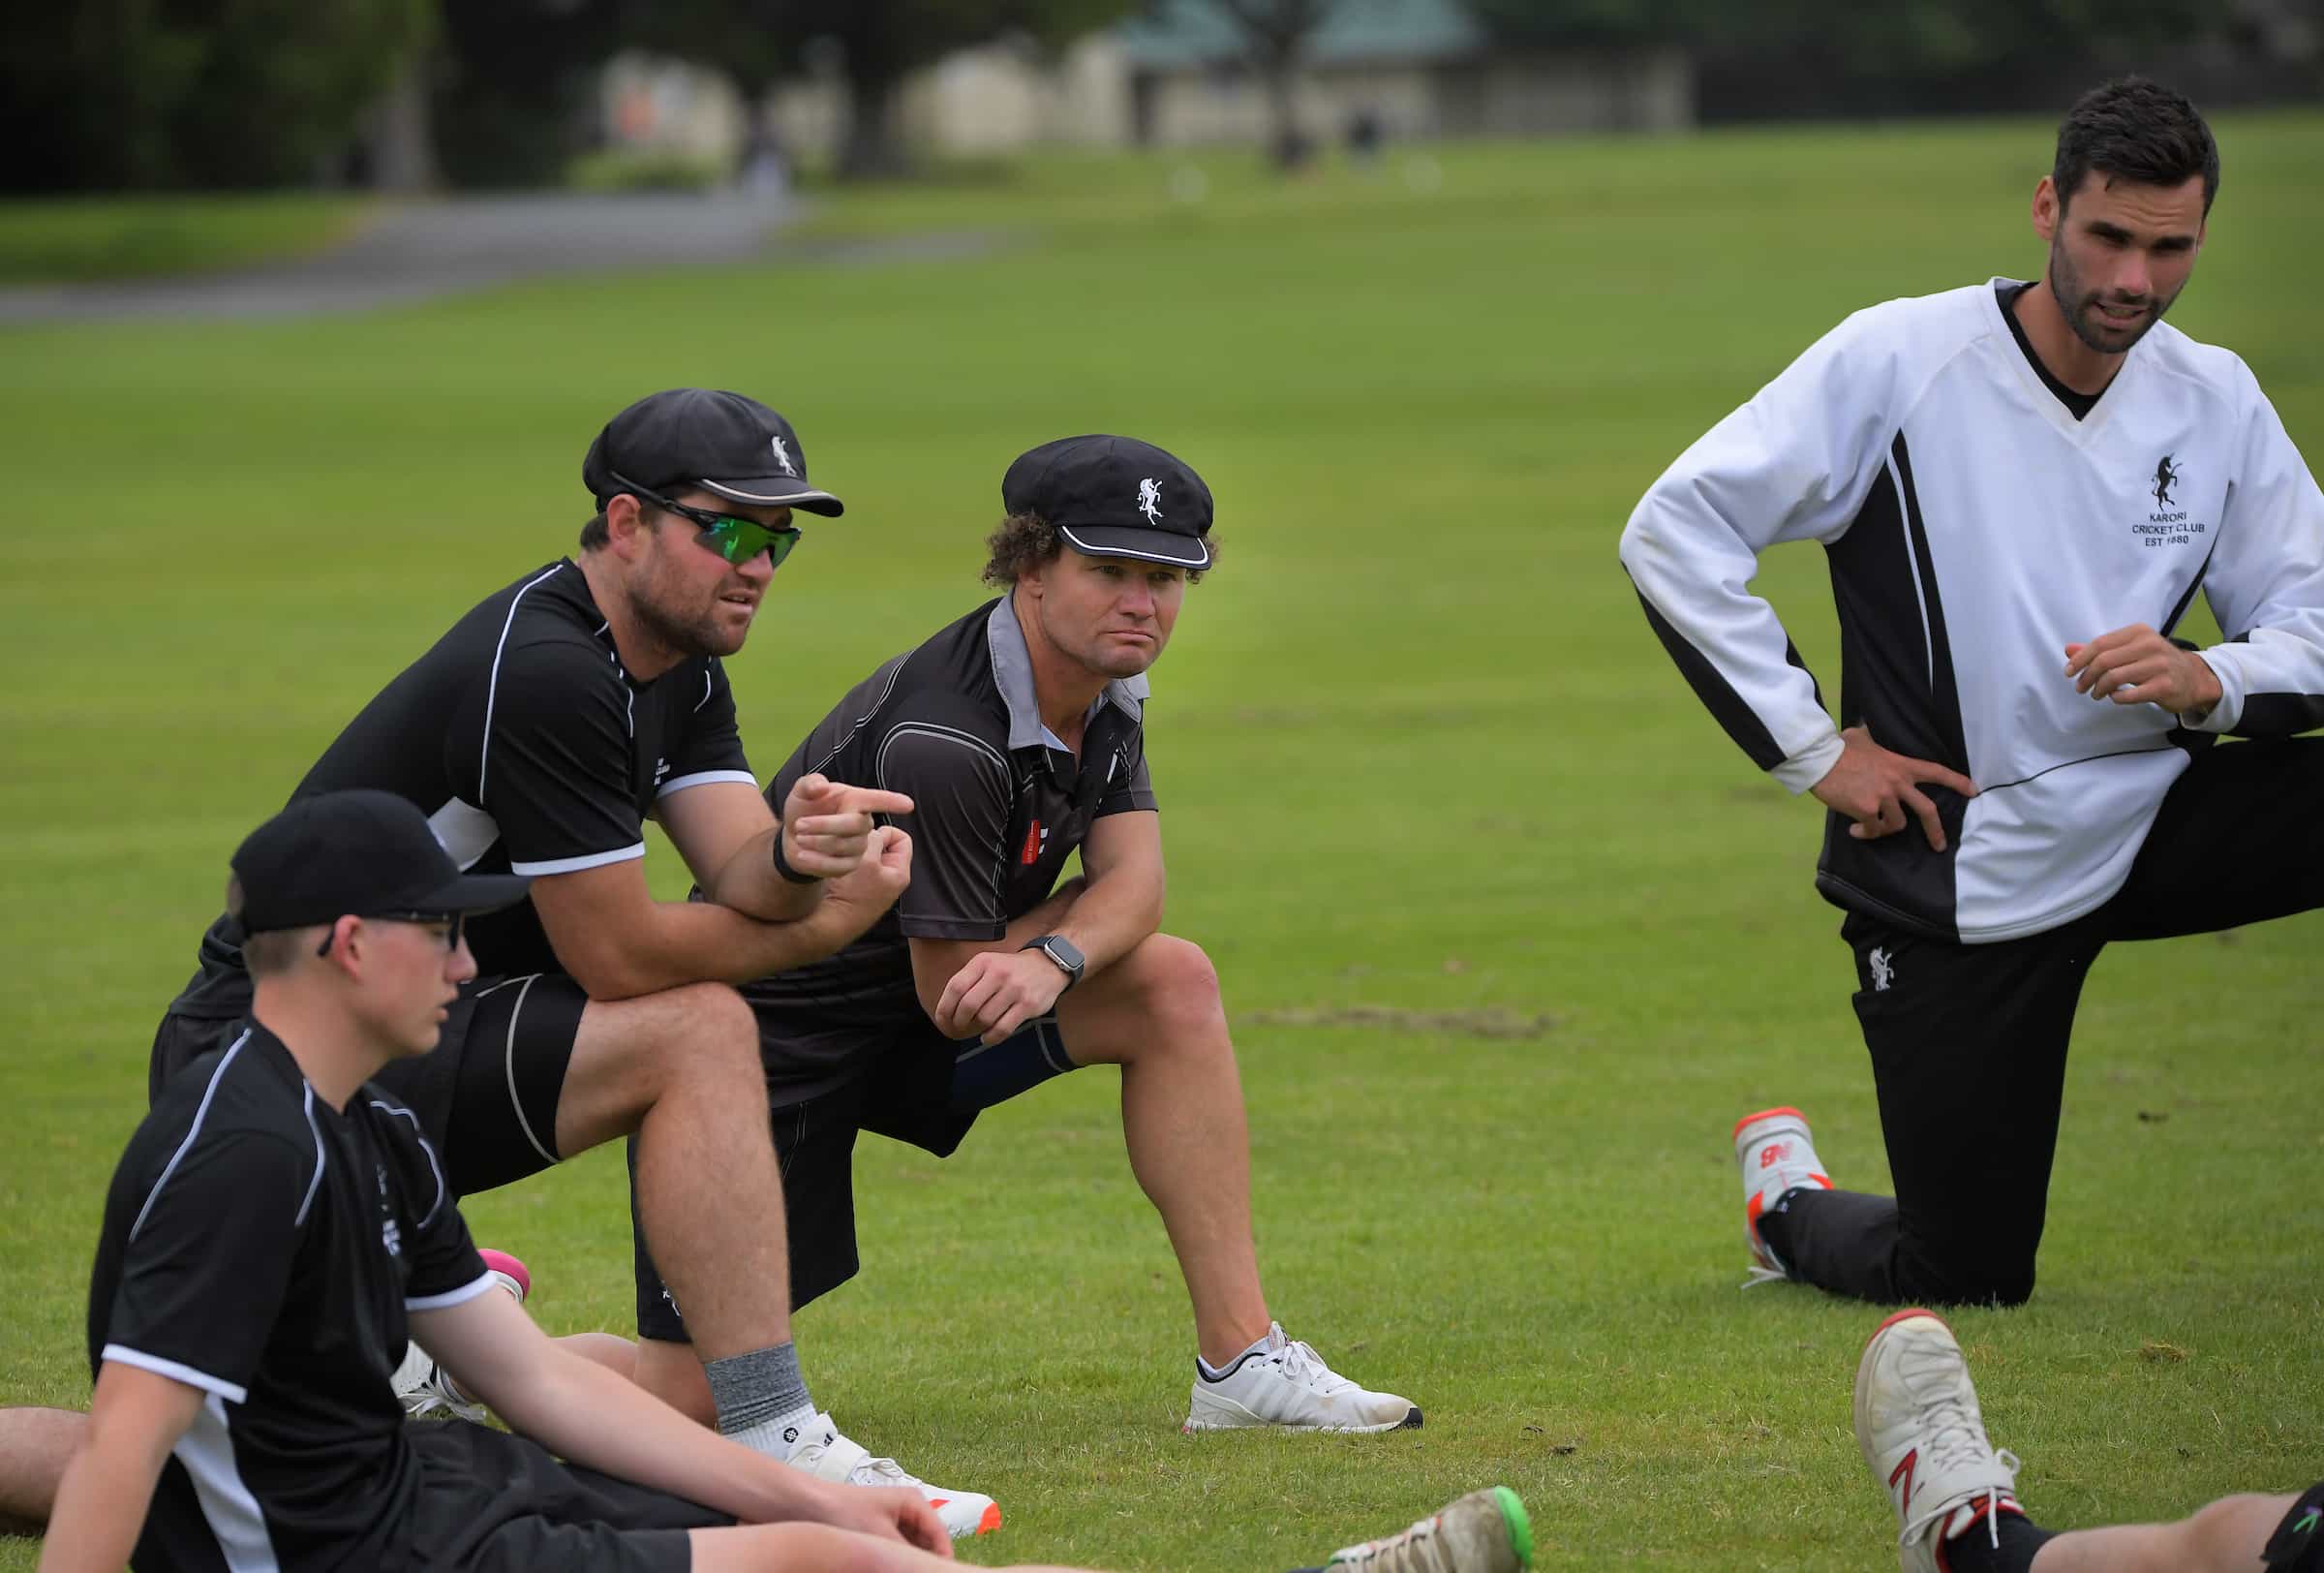 Action from the Premier T20 Cup Wellington men's twenty20 cricket match between Upper Hutt and Karori at Barton Oval Park in Upper Hutt, New Zealand on Saturday, 9 January 2021. Photo: Dave Lintott / lintottphoto.co.nz